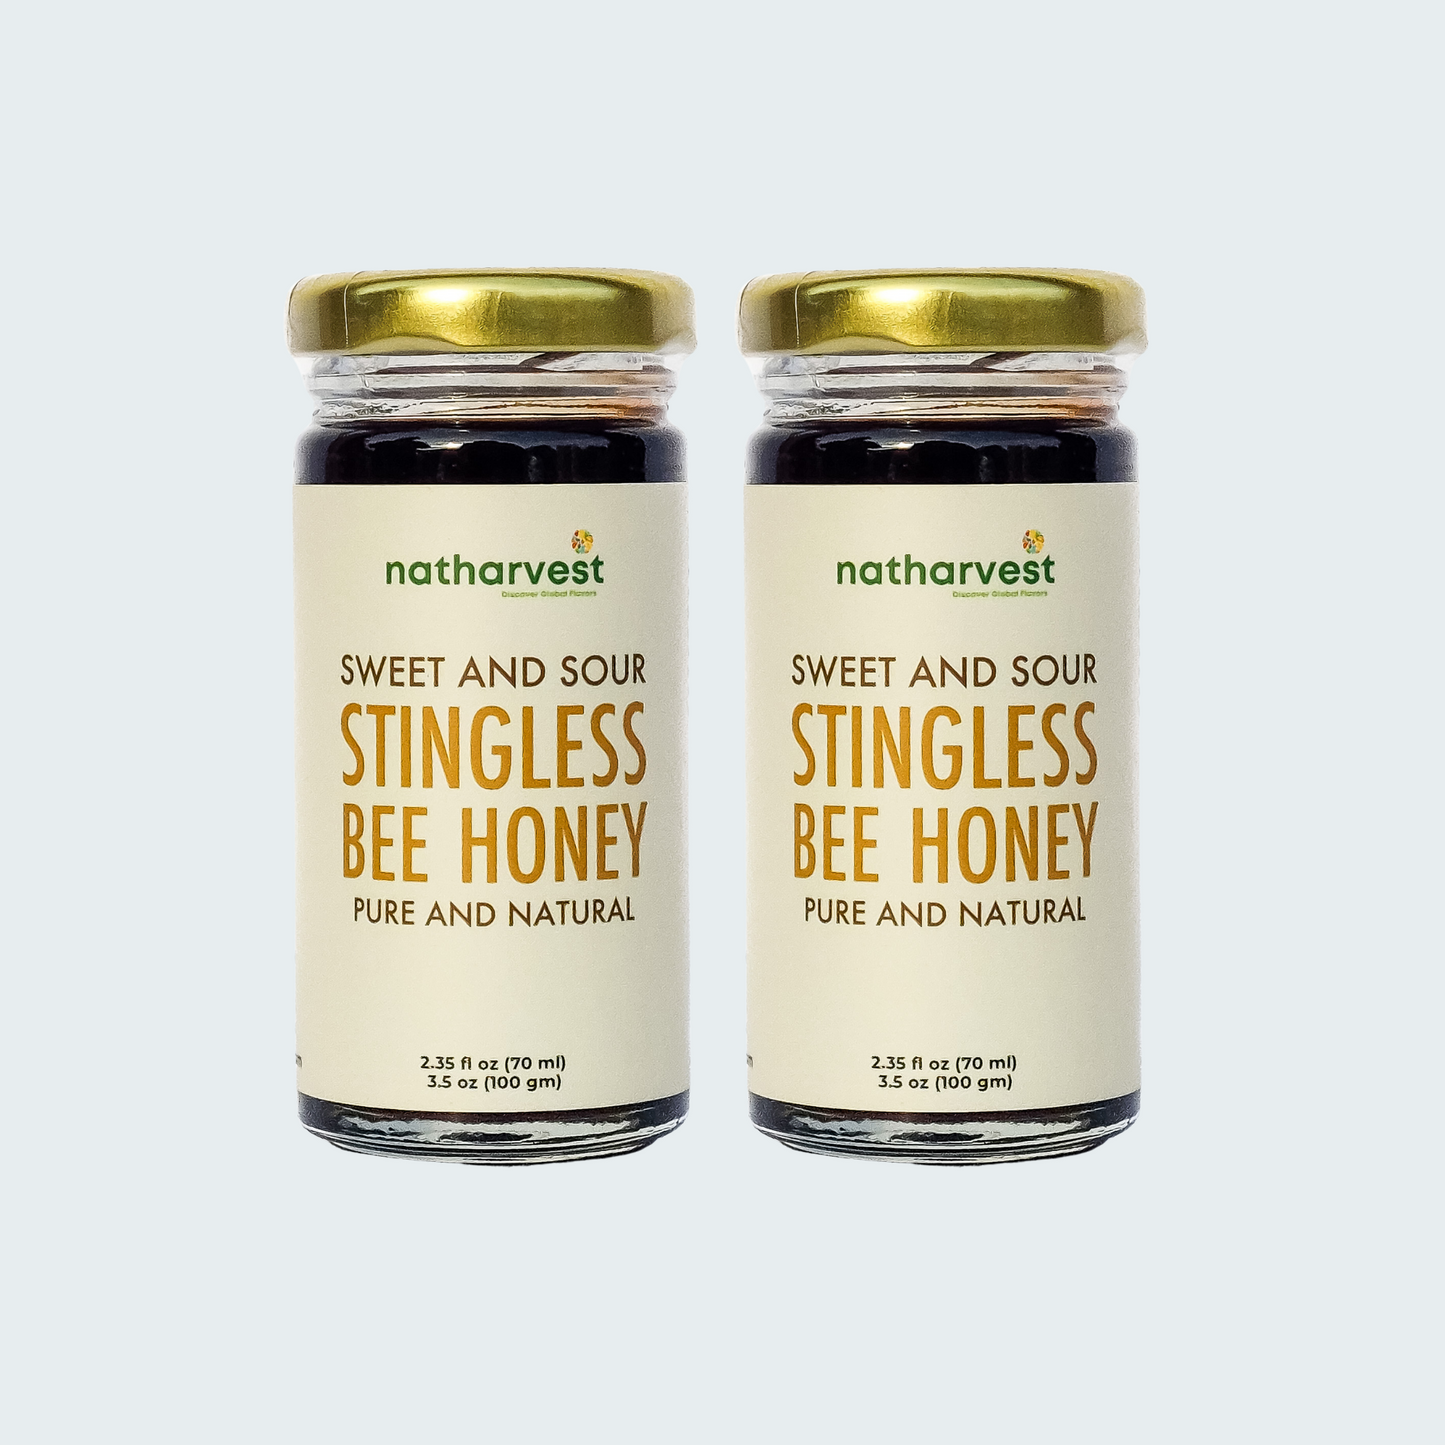 Natharvest Sweet and Sour Stingless Bee Honey, 3.5 oz (100 gm), a pack of 2